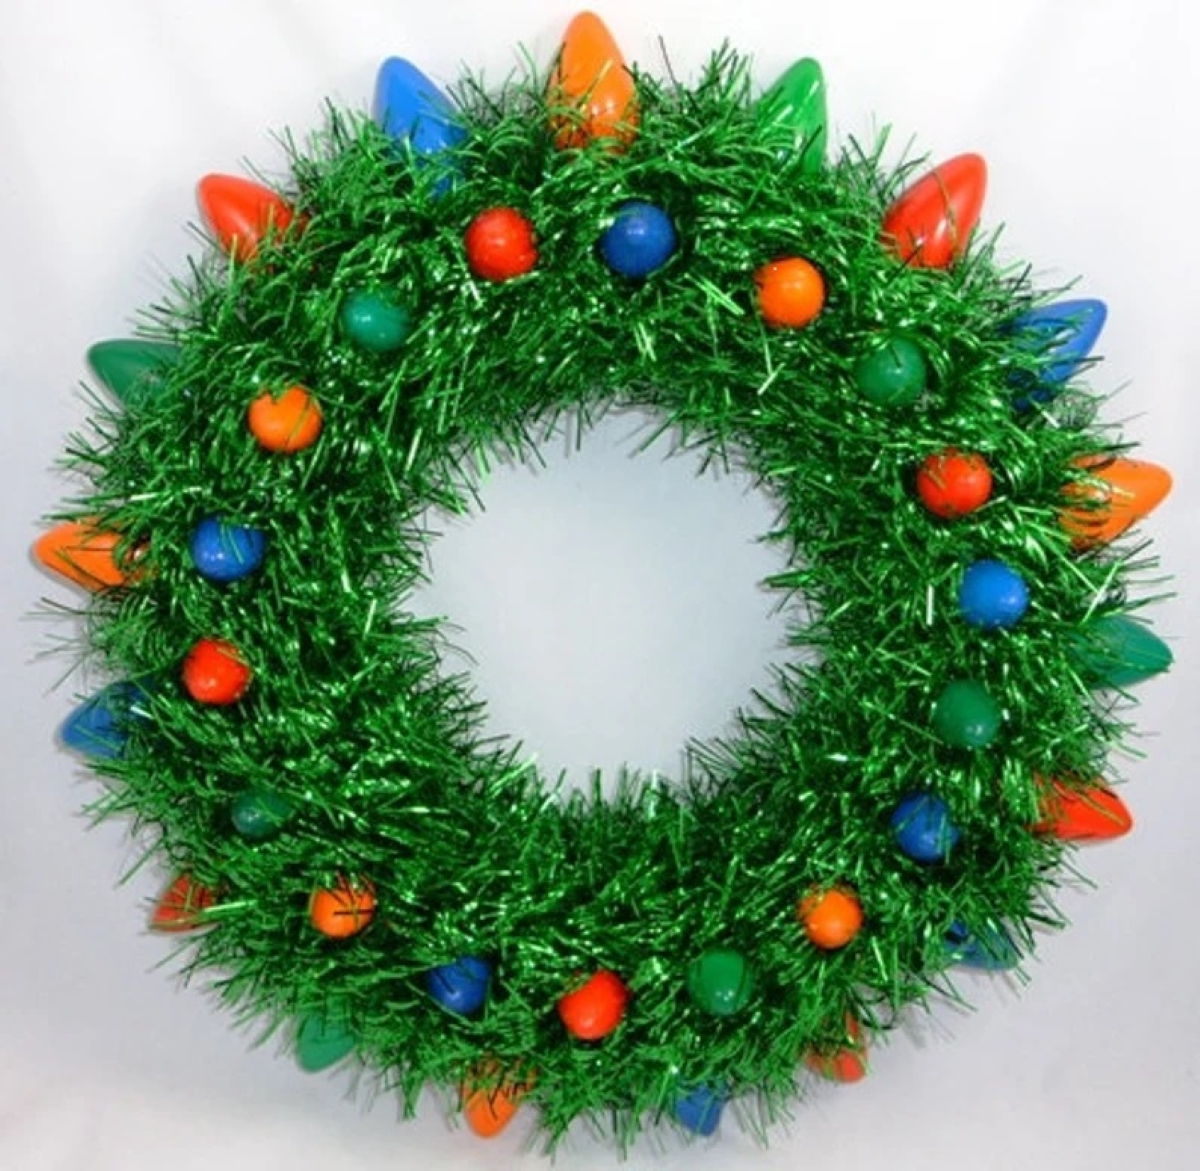 Ways to Recycle Christmas Lights - wreath